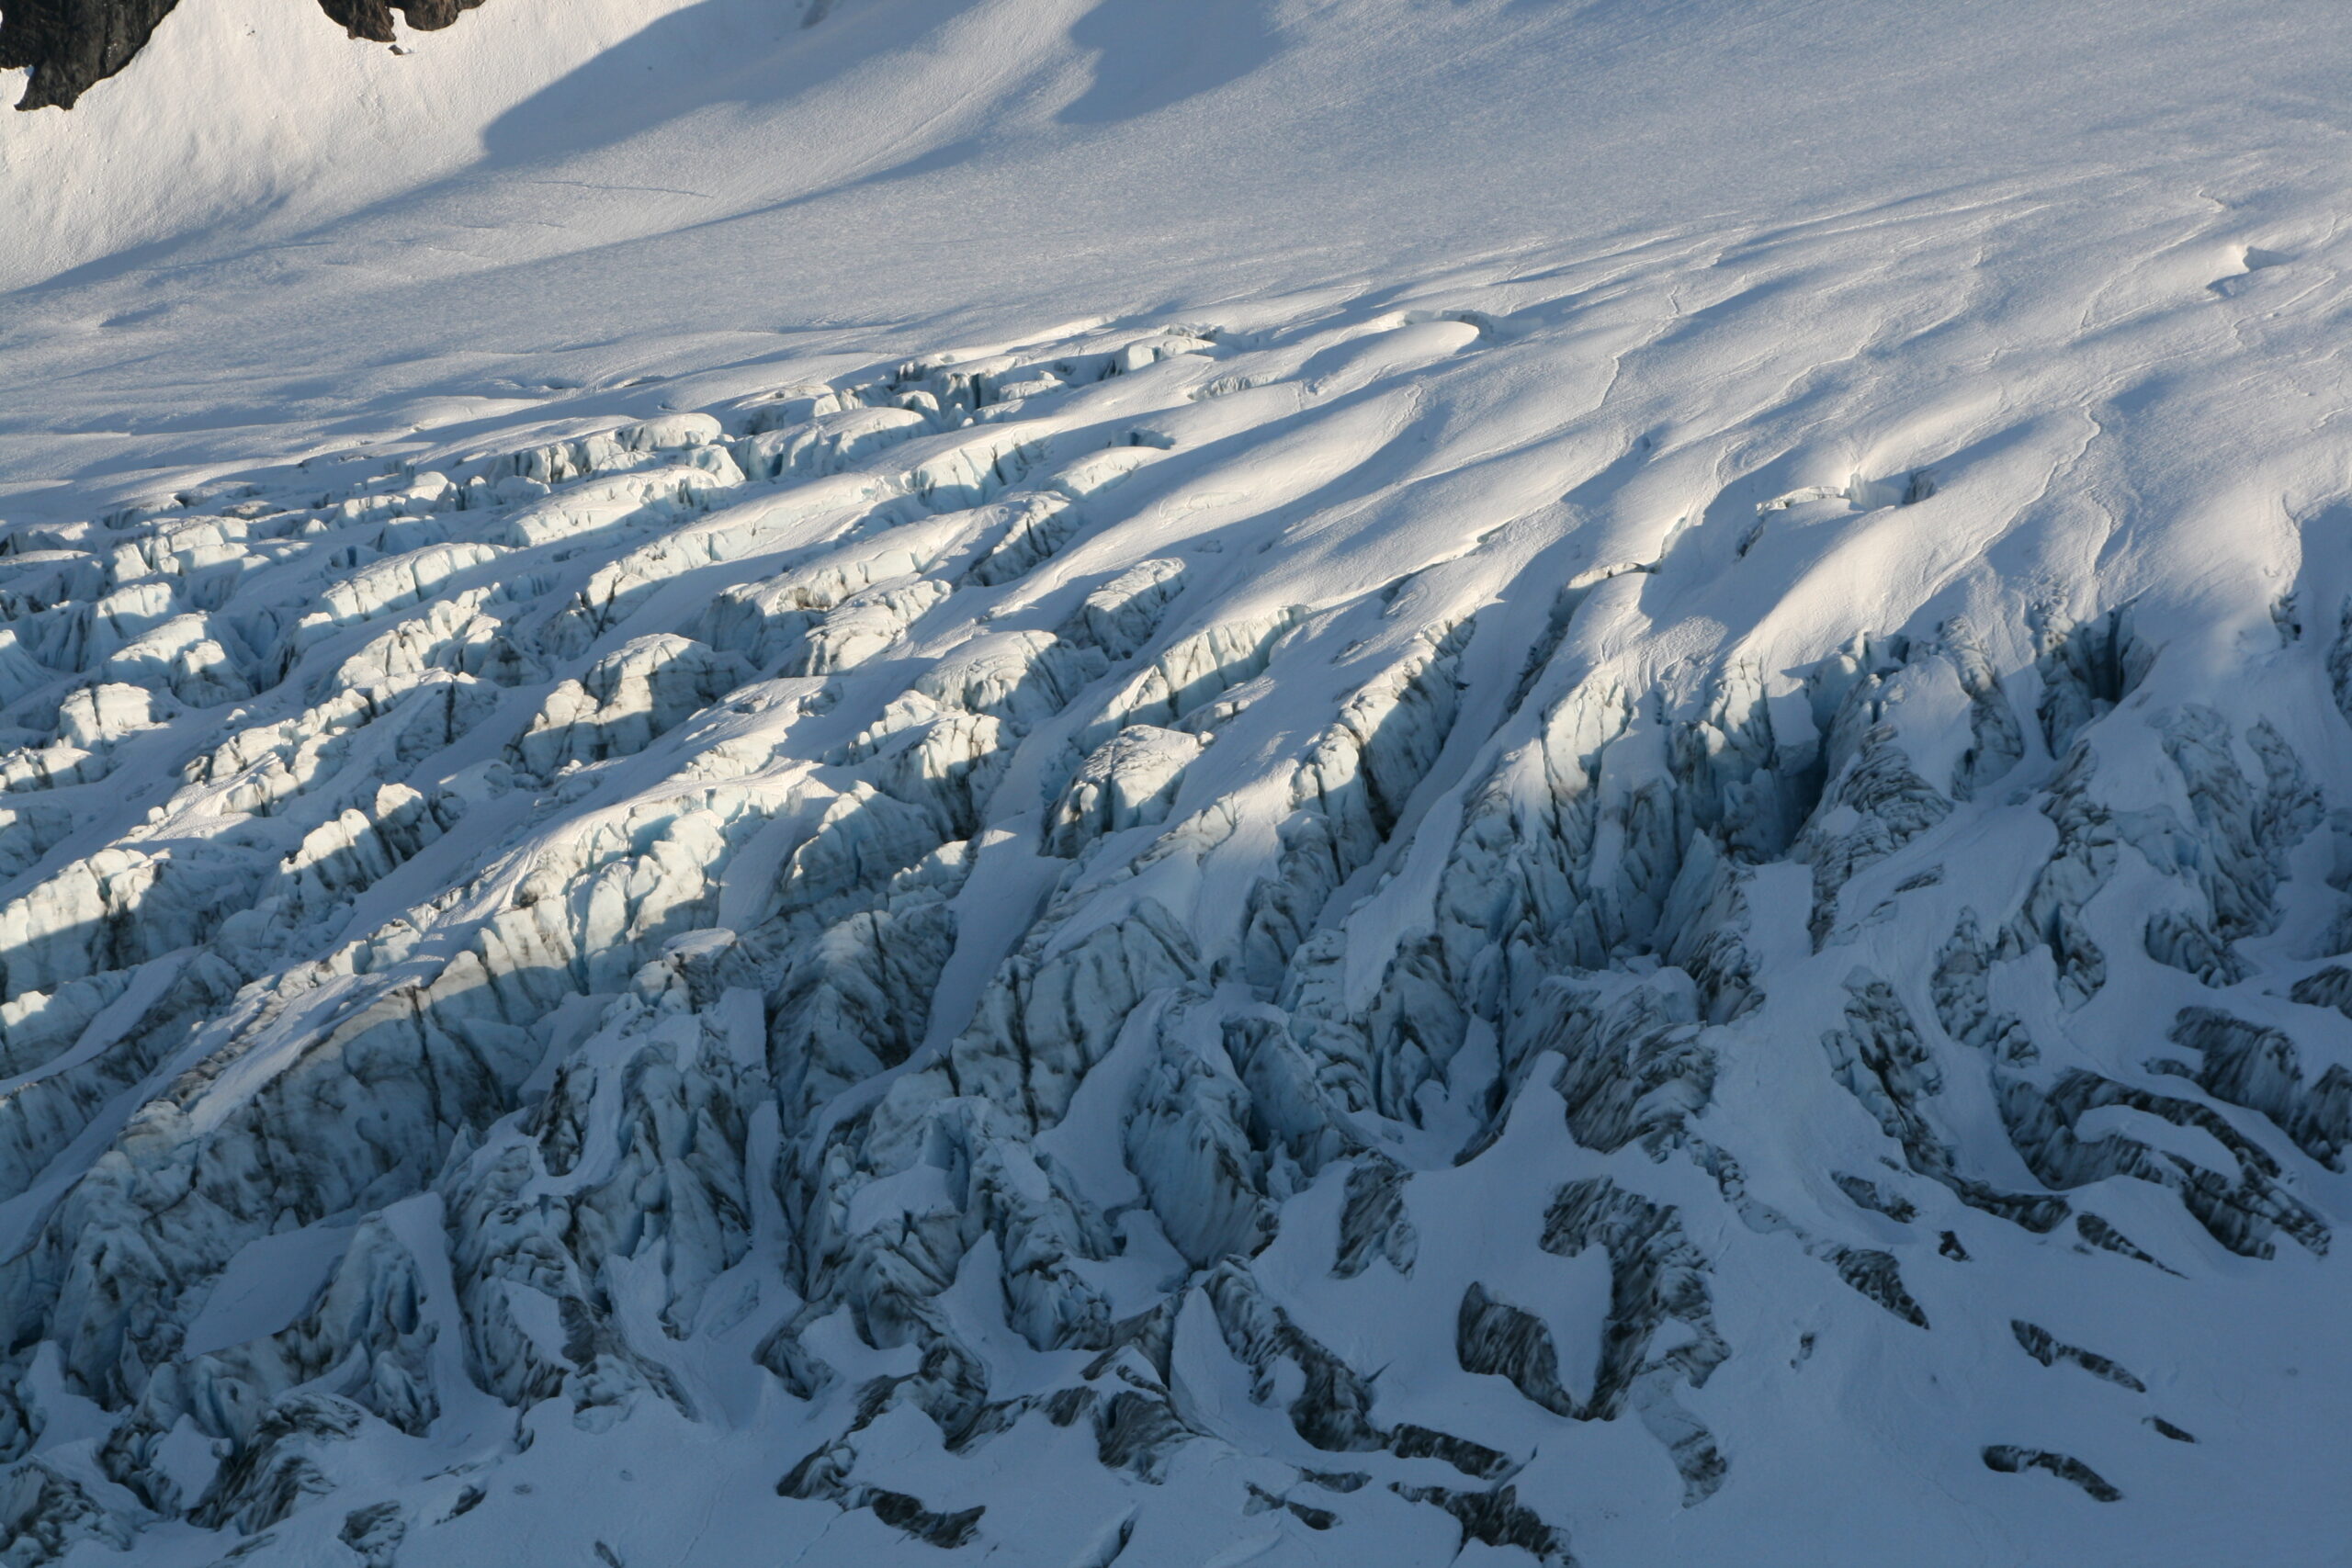 Jagged ice ridges comprise the surface of the Harding Icefield in Kenai Fjords National Park.